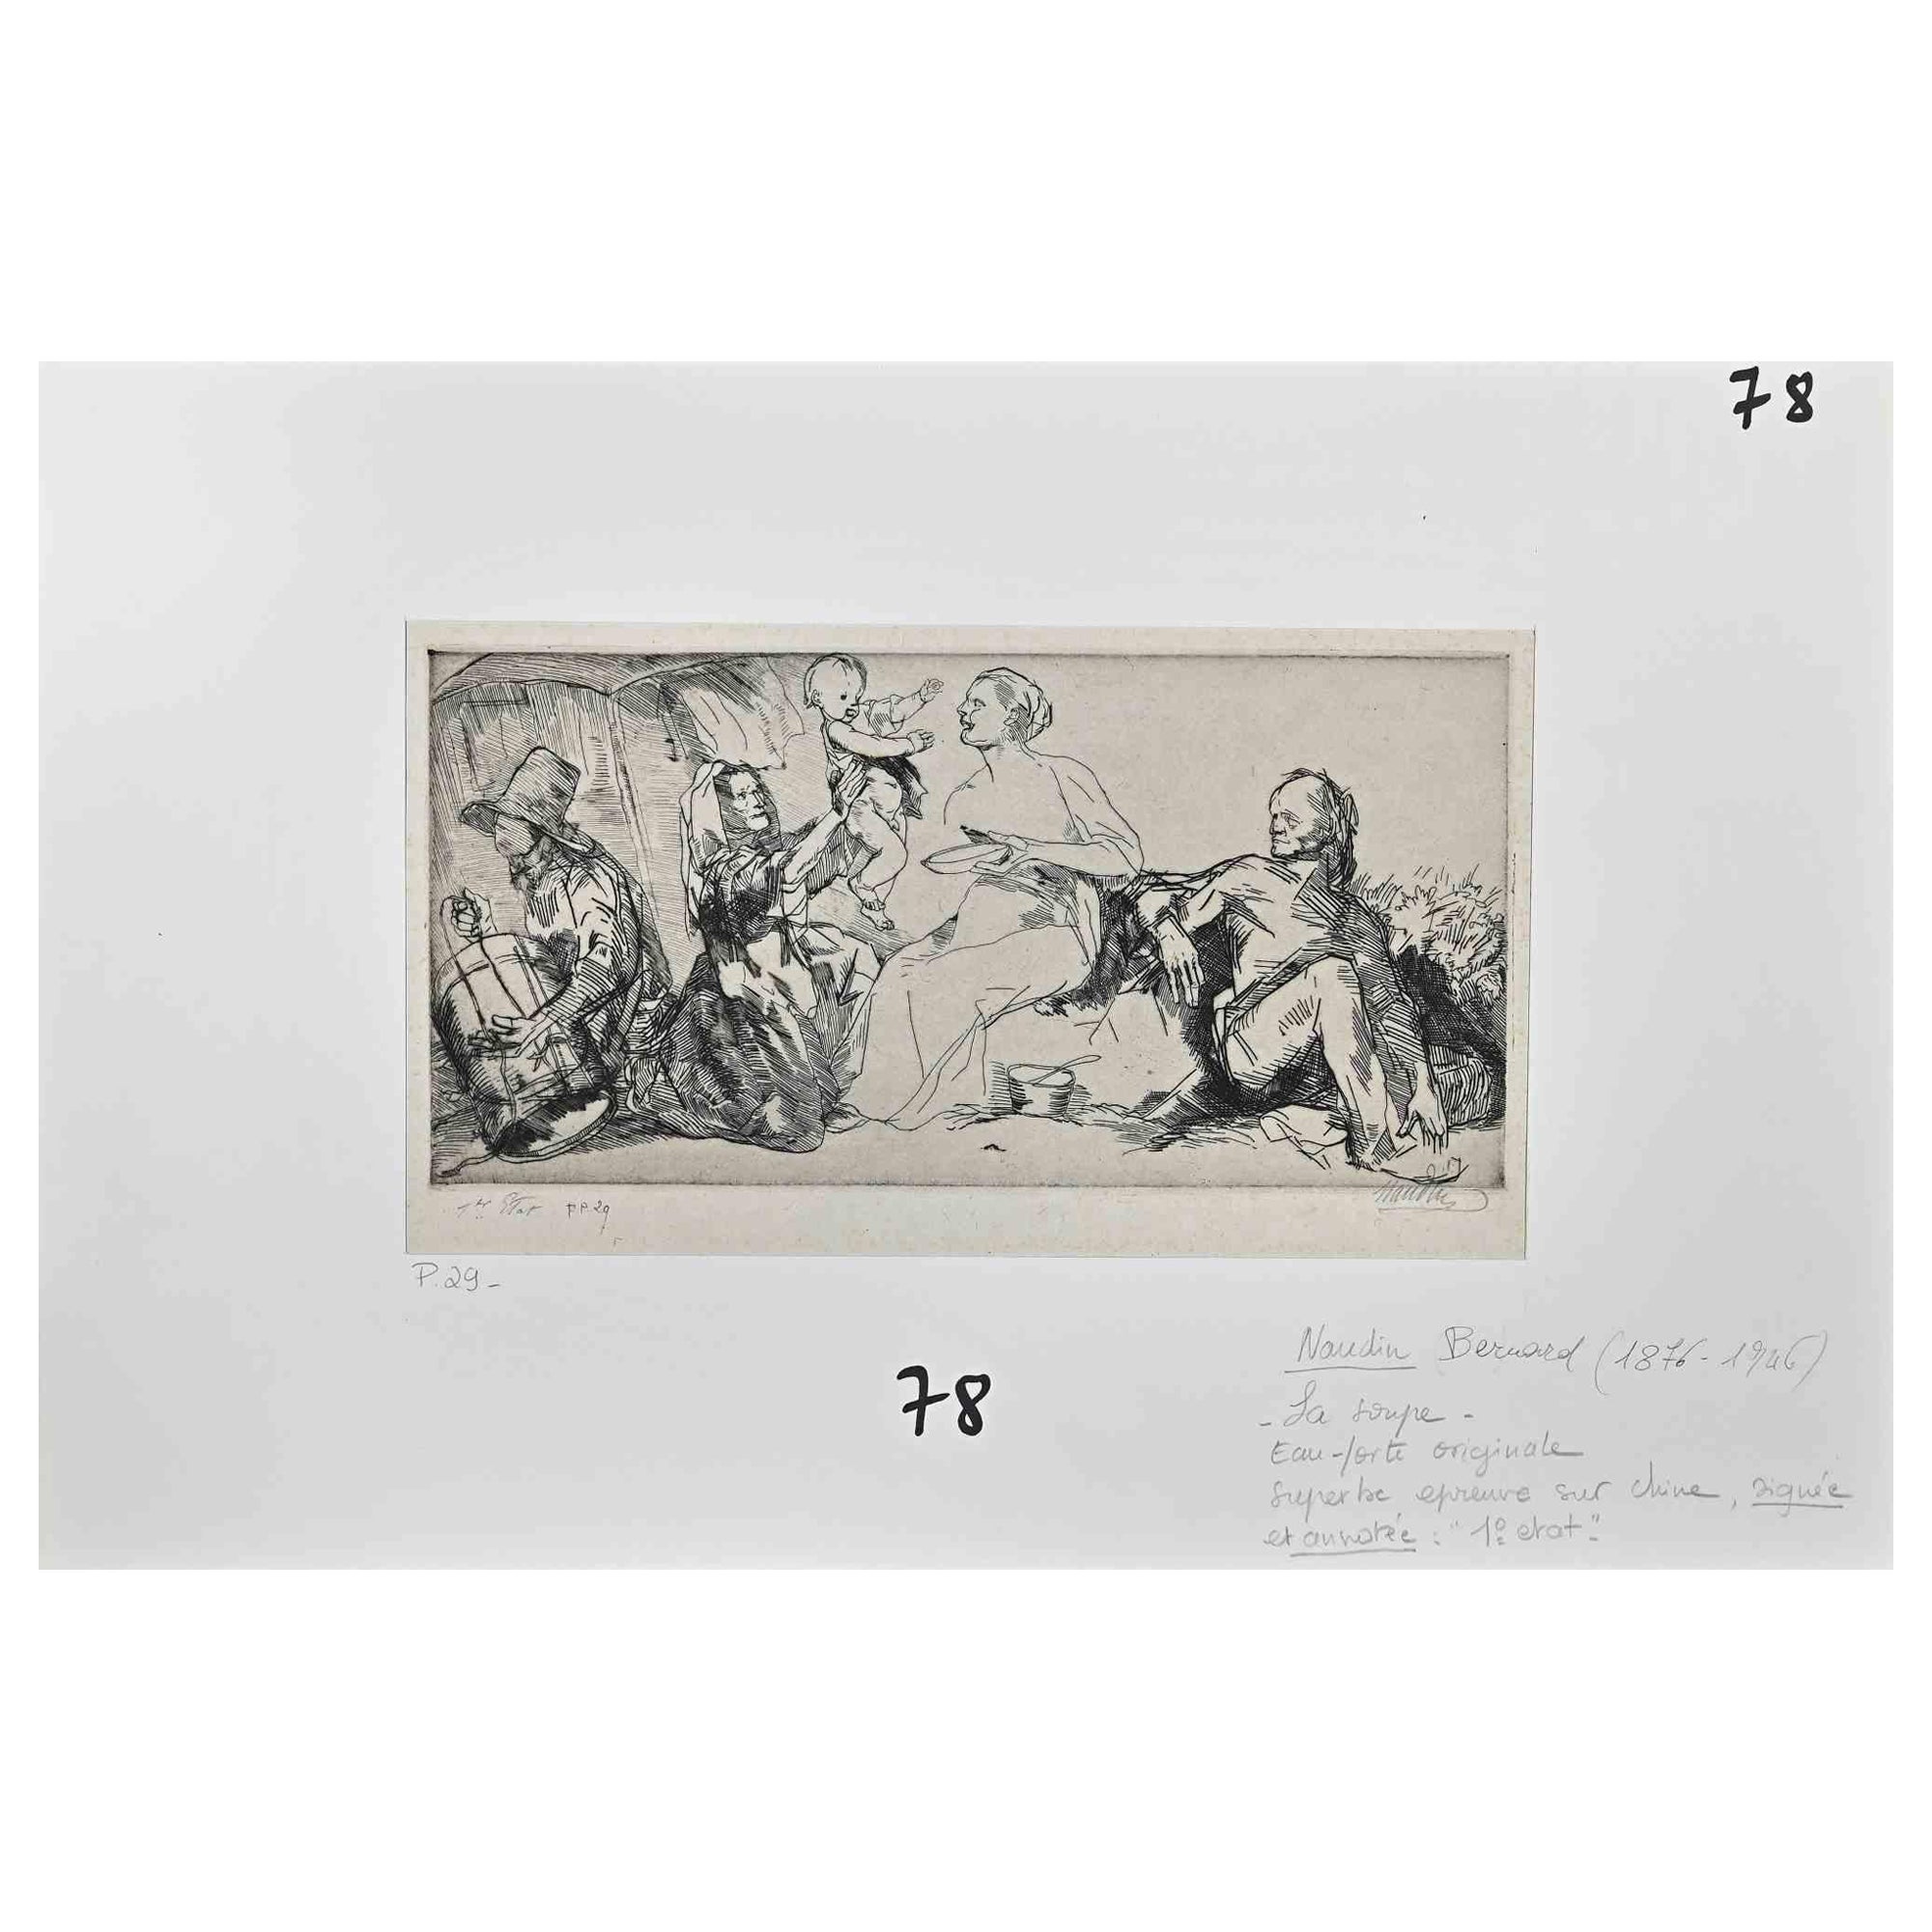  La Soupe is an etching realized by Bernard Naudin (1876-1946).

Hand Signed on the right corner, numbered "1° Etat F P 29" on the left corner. Passpartout included cm 33x50

The artwork  is in good condition .

Bernard Étienne Hubert Naudin (11